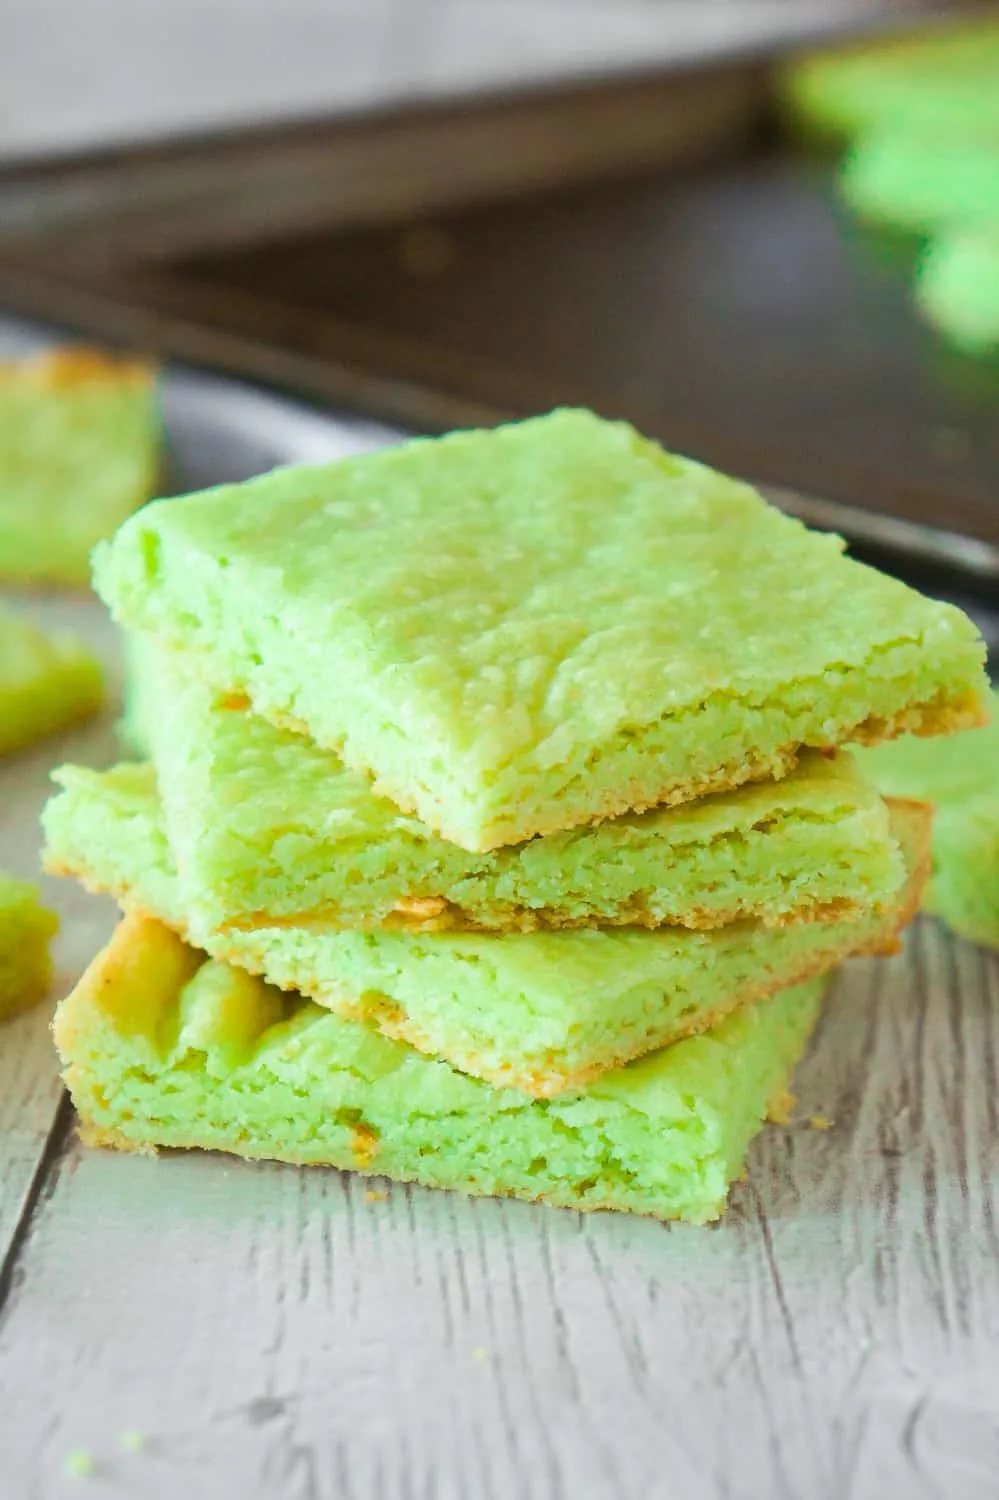 Pistachio Pudding Sugar Cookie Bars are soft, chewy and delicious. This super easy cookie bar recipe uses pistachio instant pudding mix and Betty Crocker sugar cookie mix.